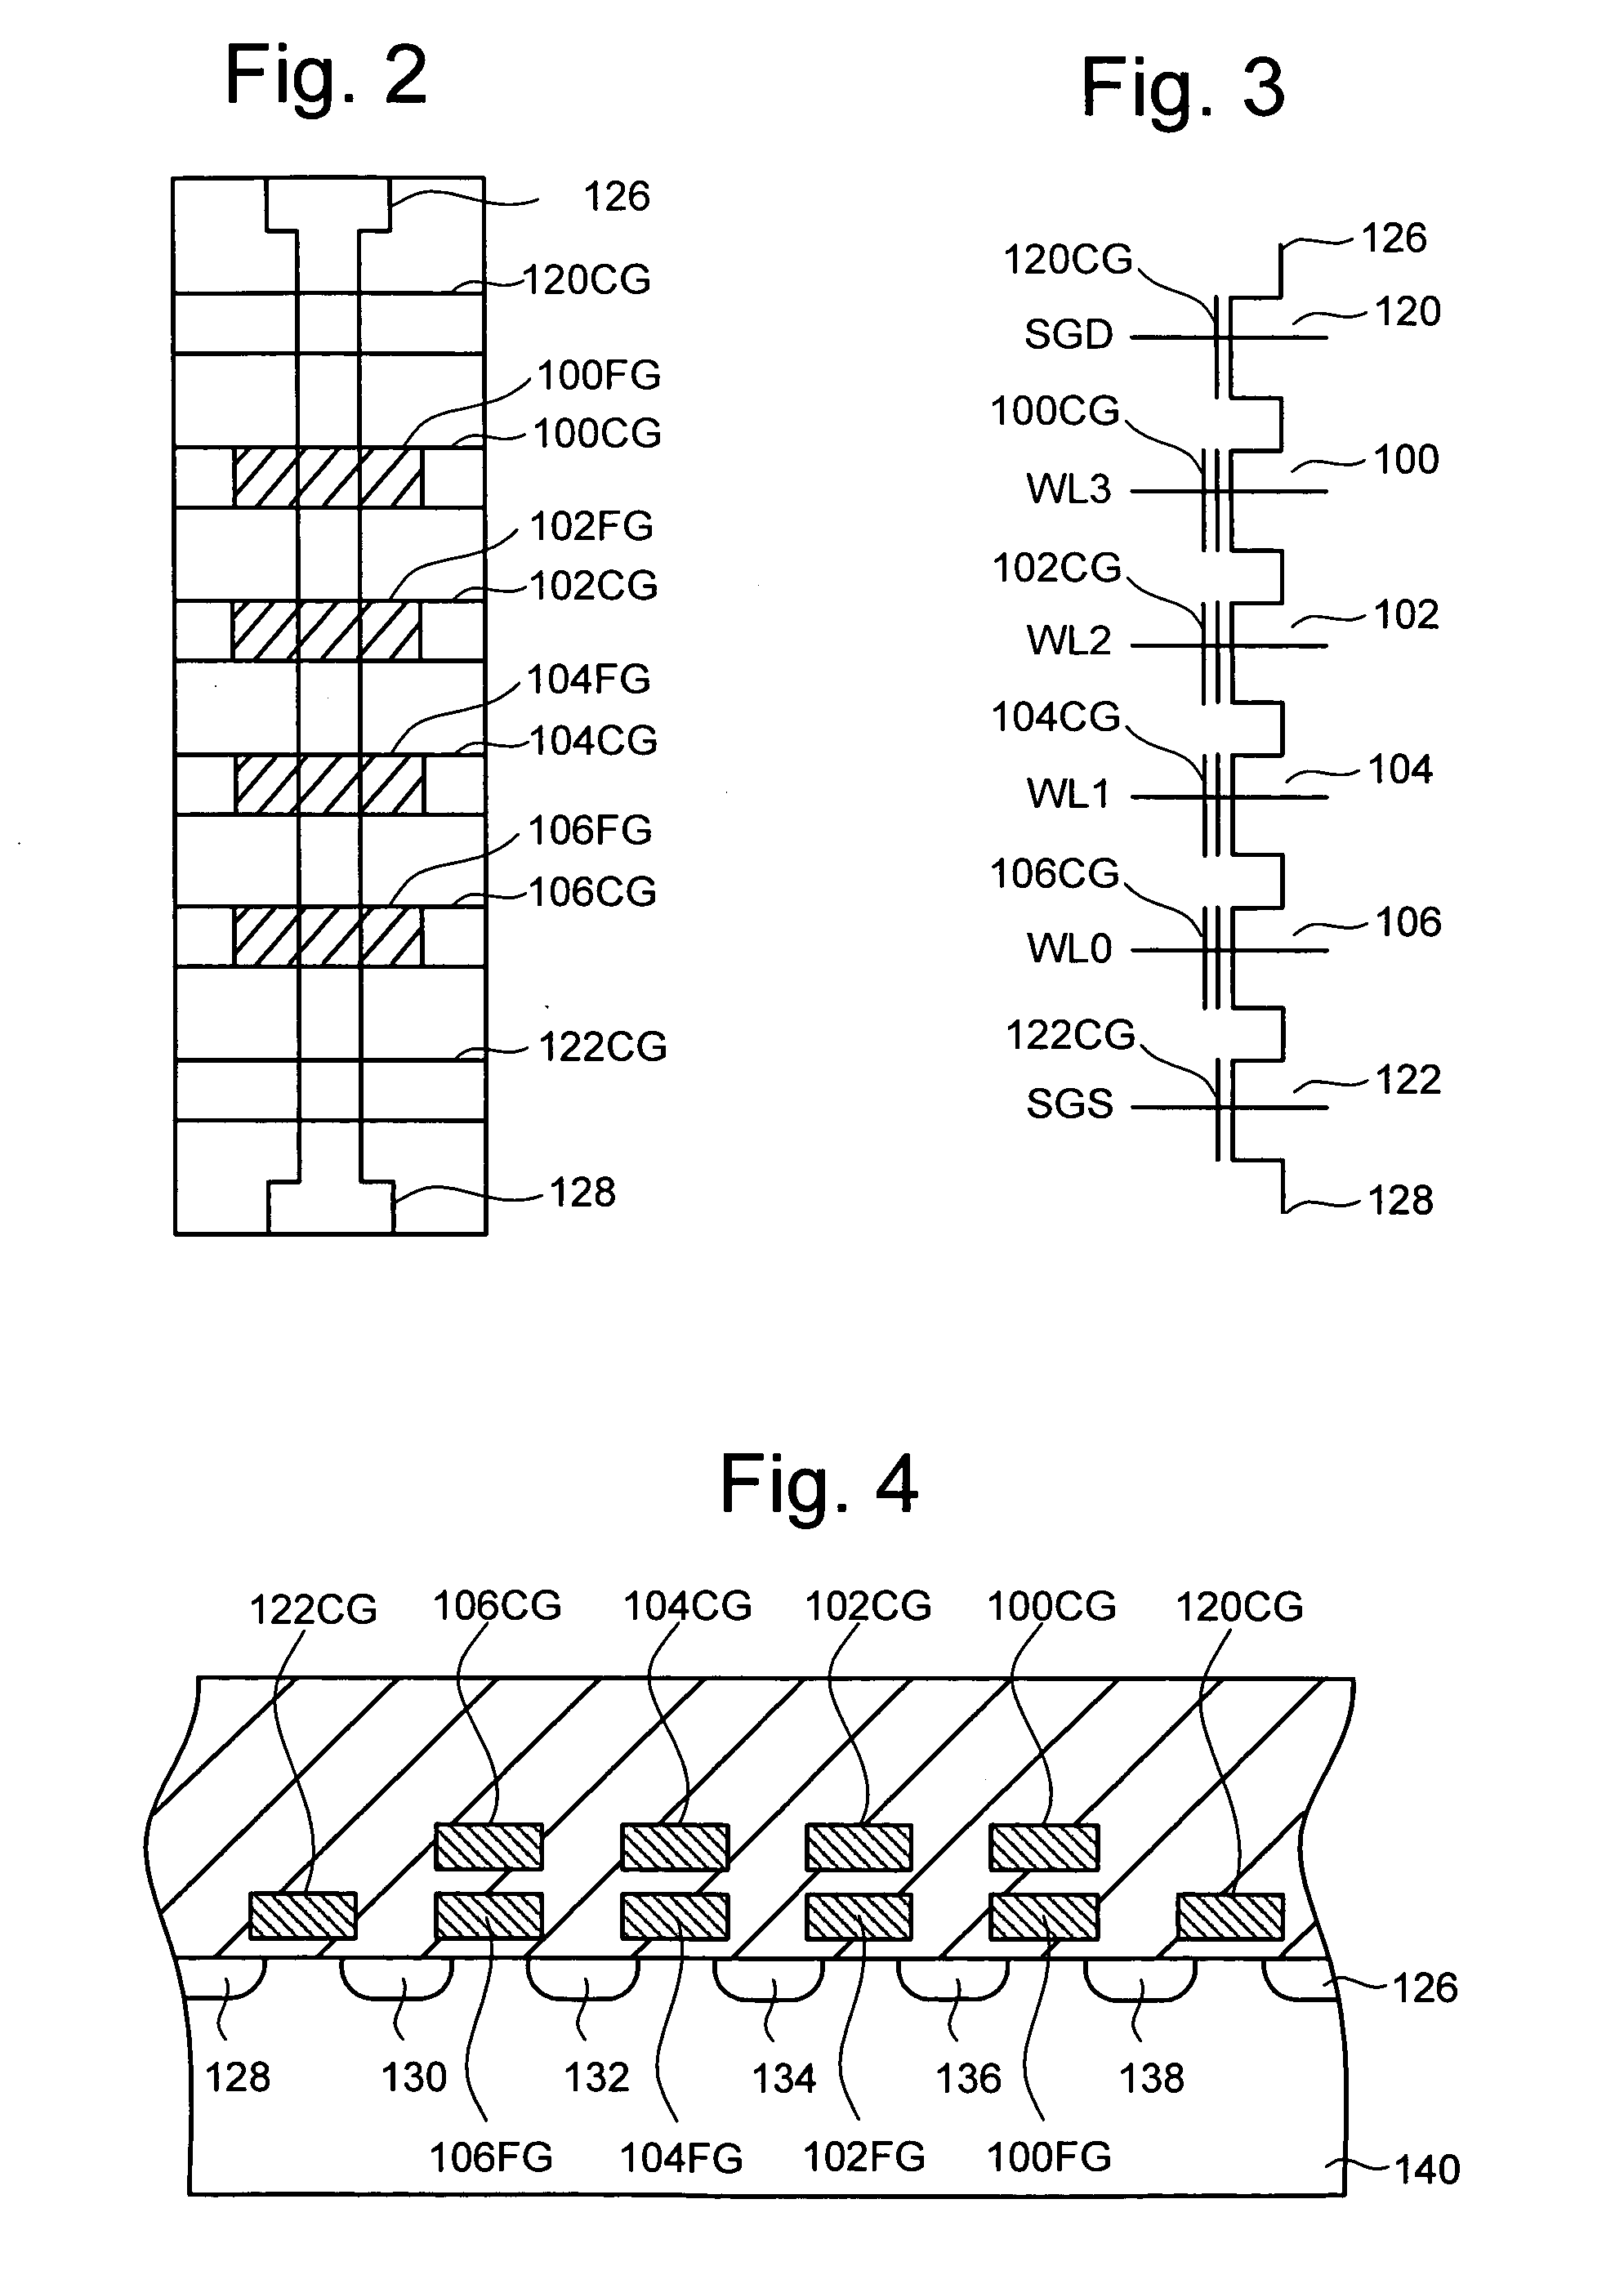 Portable memory storage device with biometric identification security